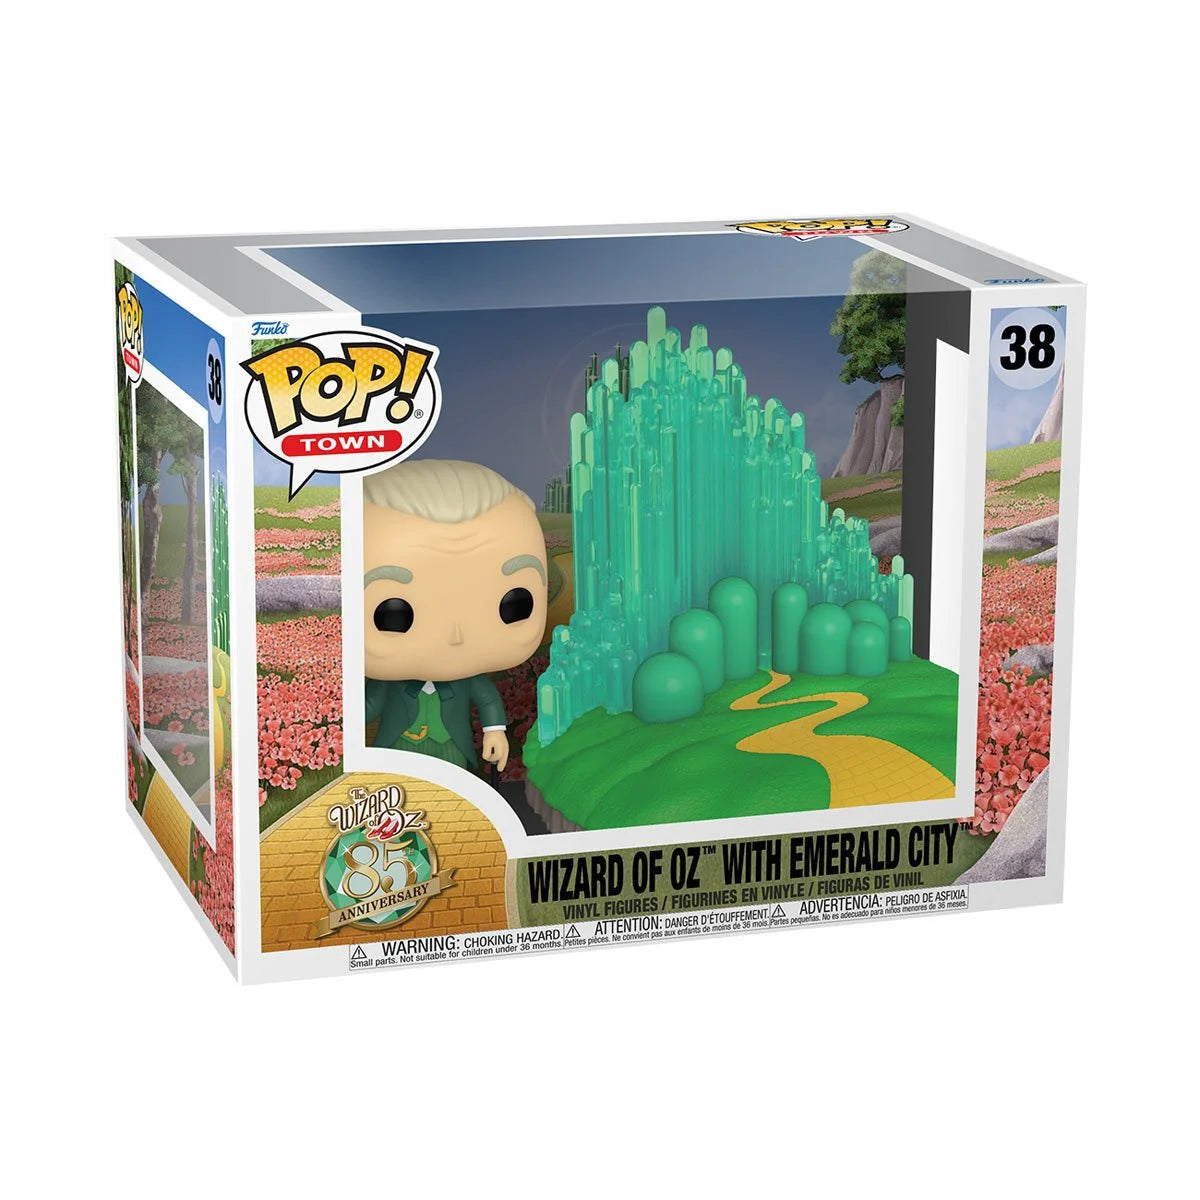 Funko Pop! The Wizard of Oz 85th Anniversary Wizard of Oz with Emerald City Town #38